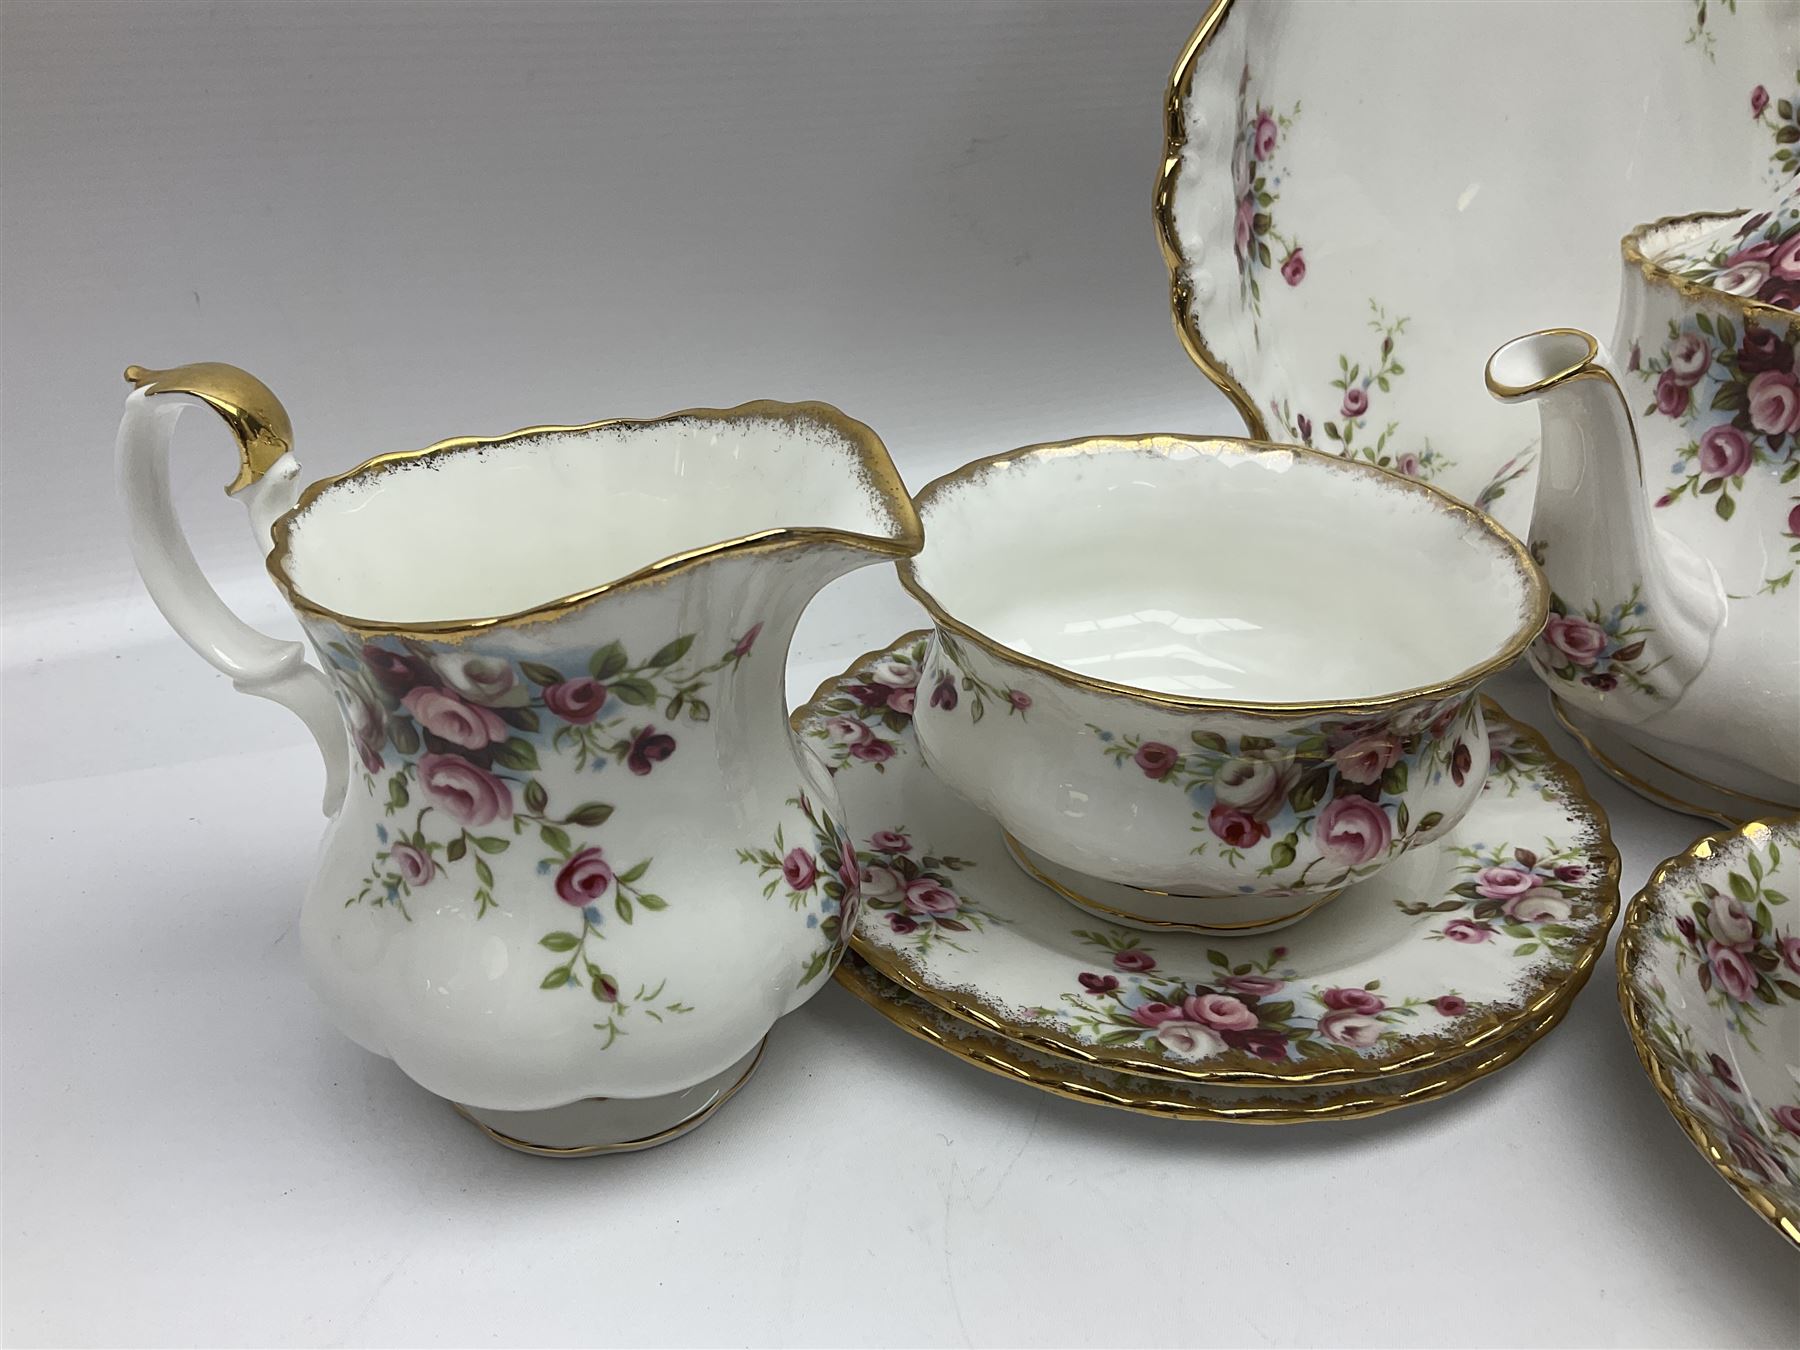 Royal Albert Cottage Garden pattern tea service for six people - Image 7 of 10